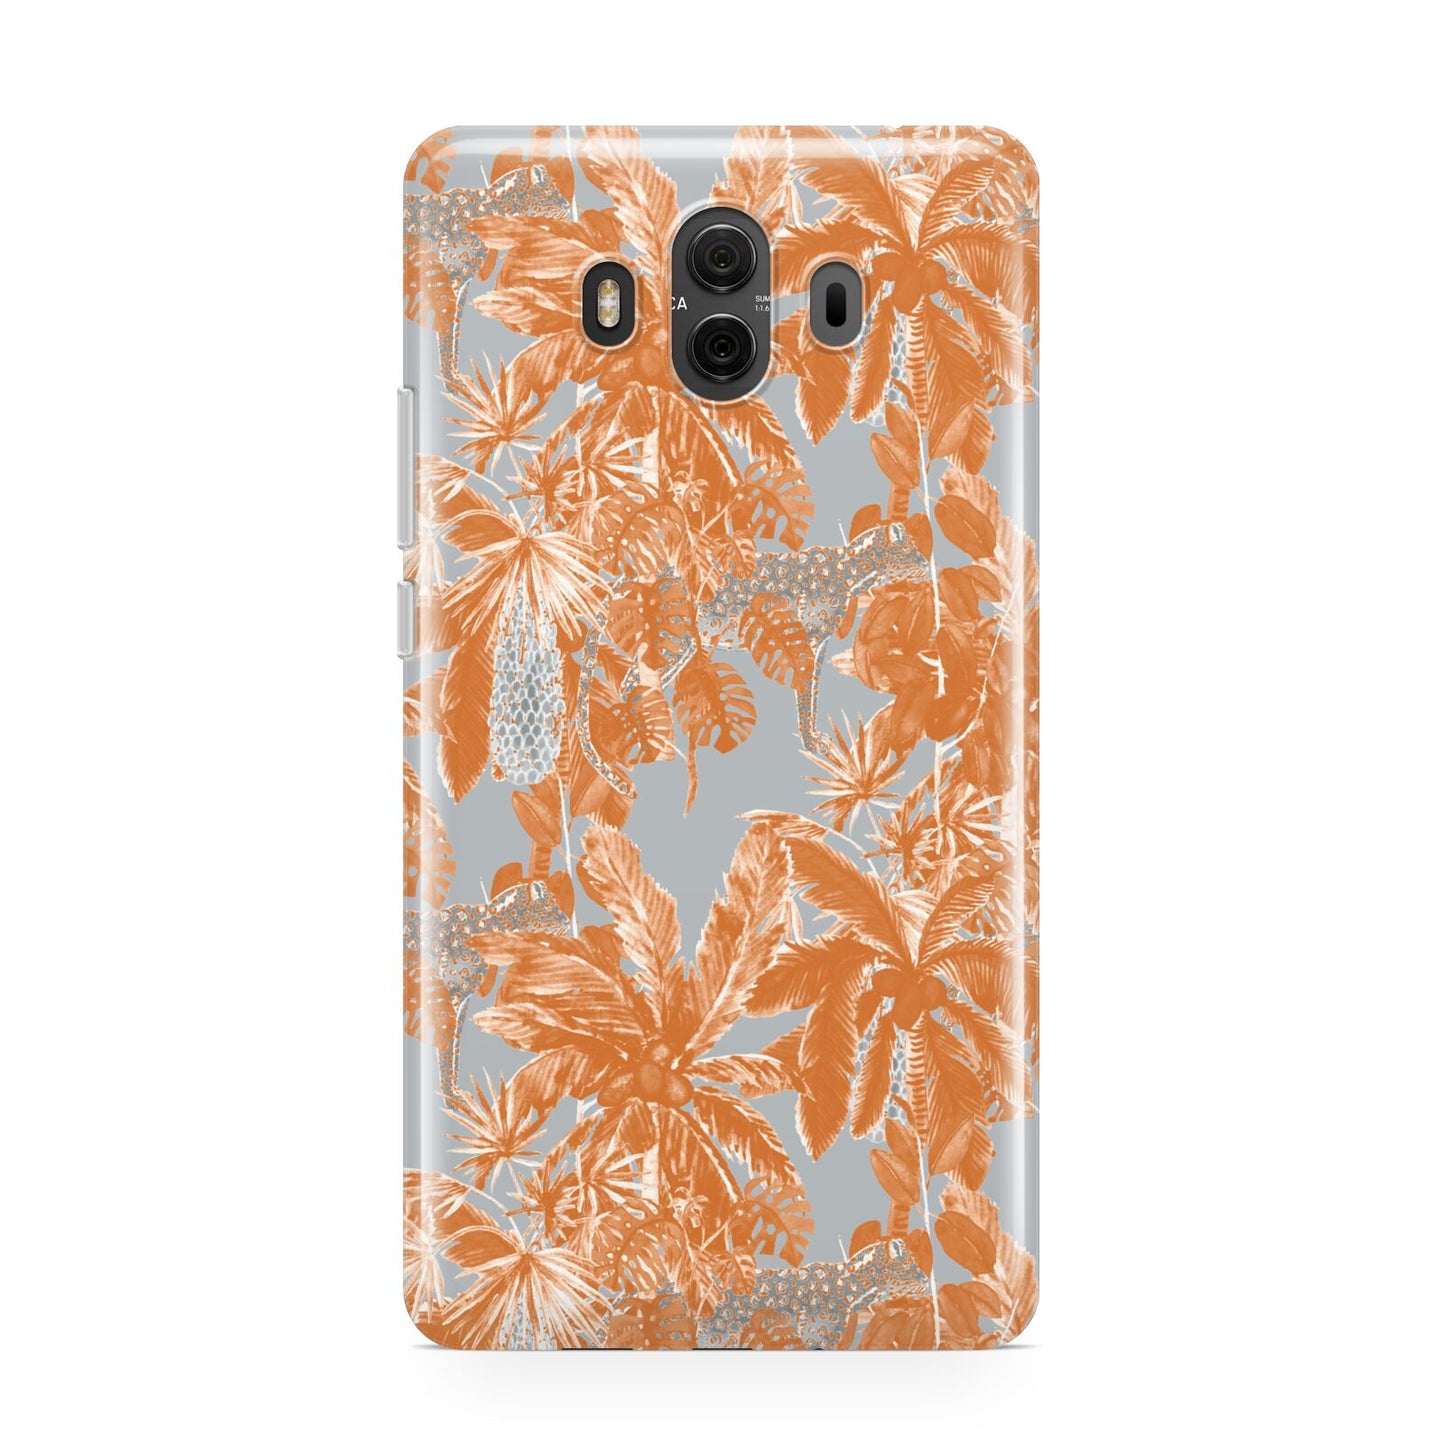 Tropical Huawei Mate 10 Protective Phone Case